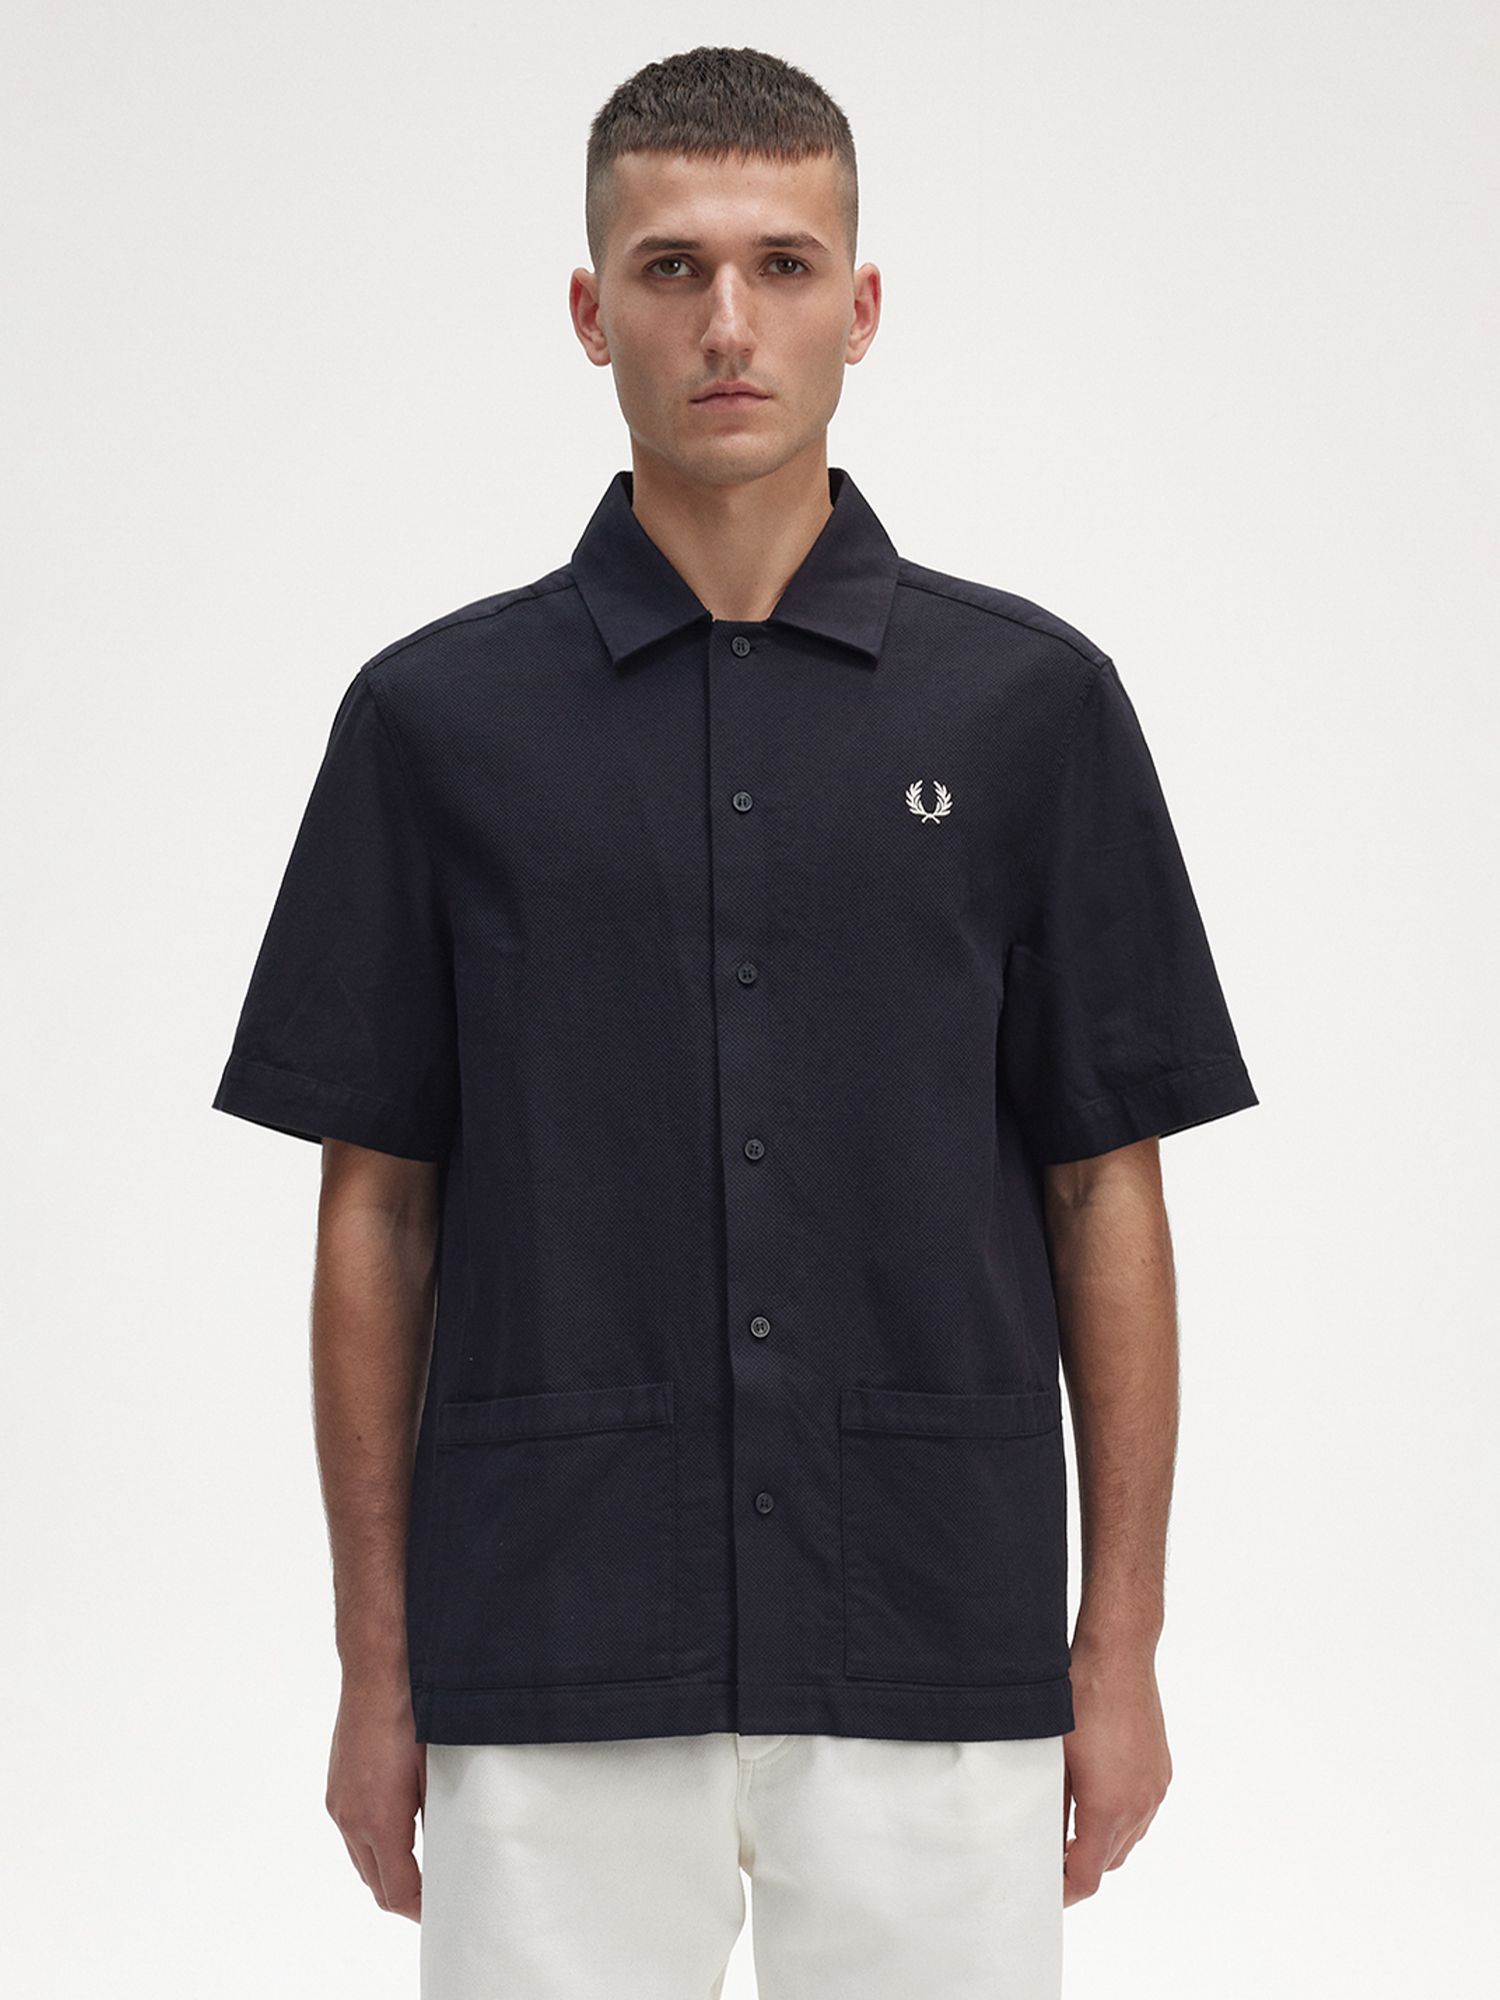 Fred Perry Linen Pique Panel Shirt, Black at John Lewis & Partners